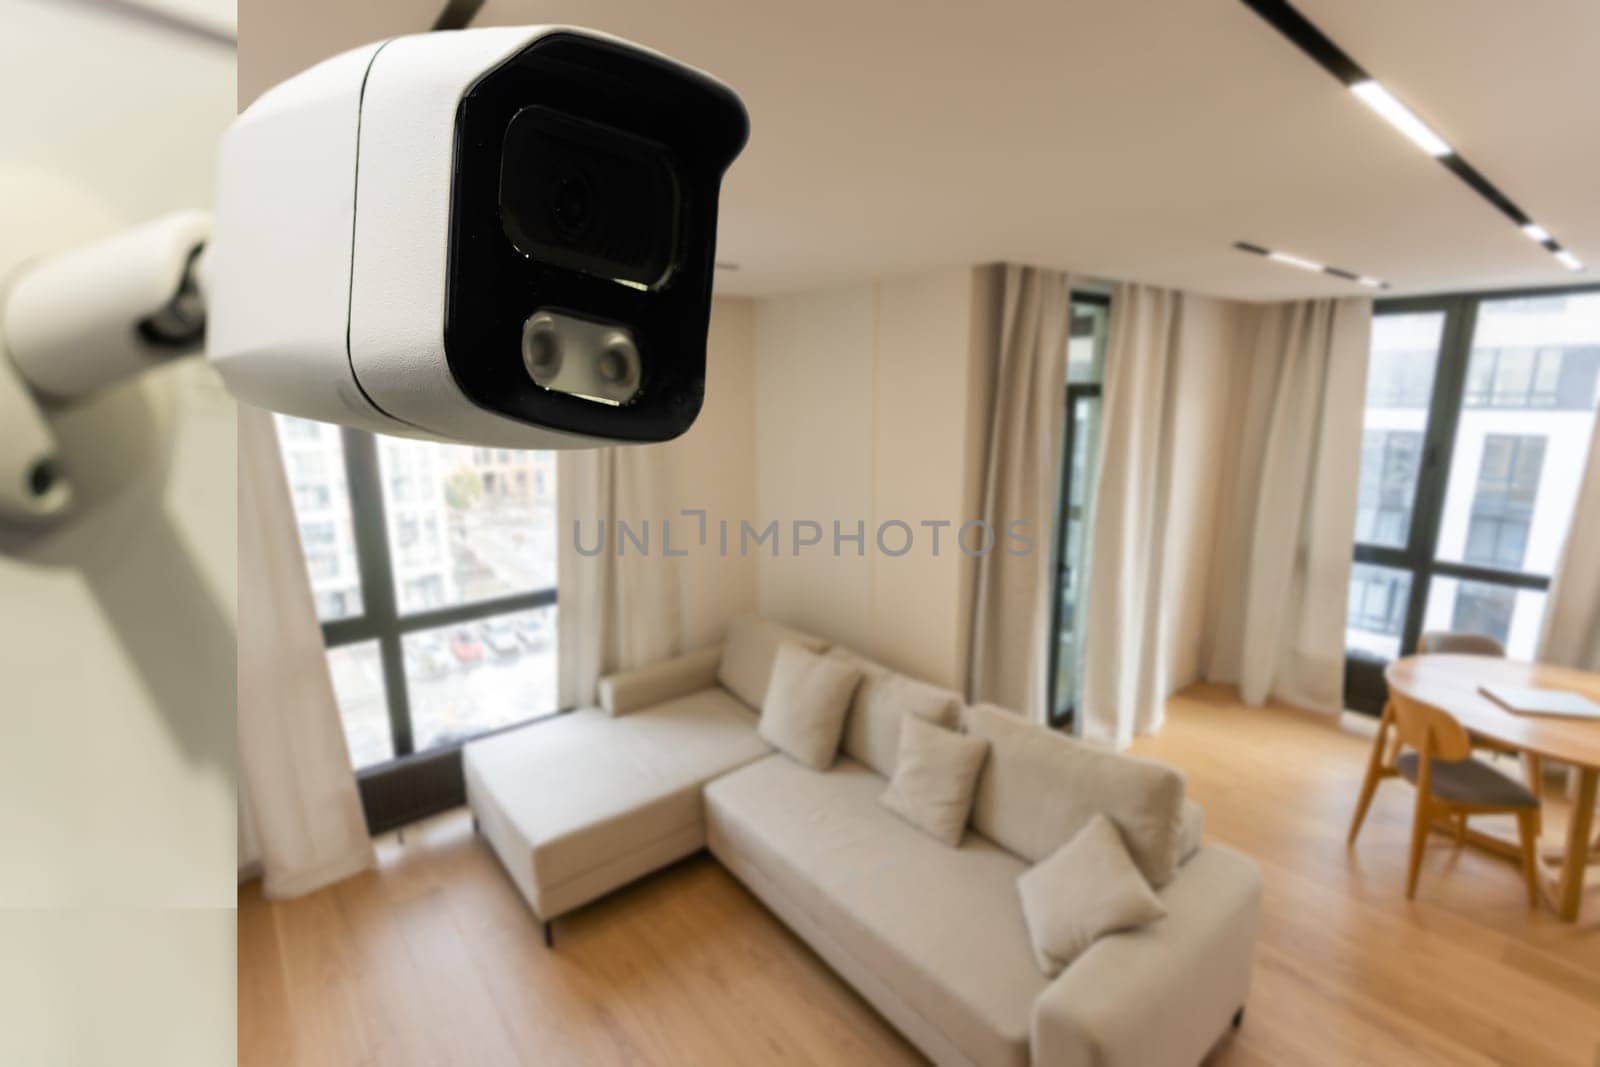 Cctv camera system, home security technology outside security by Andelov13